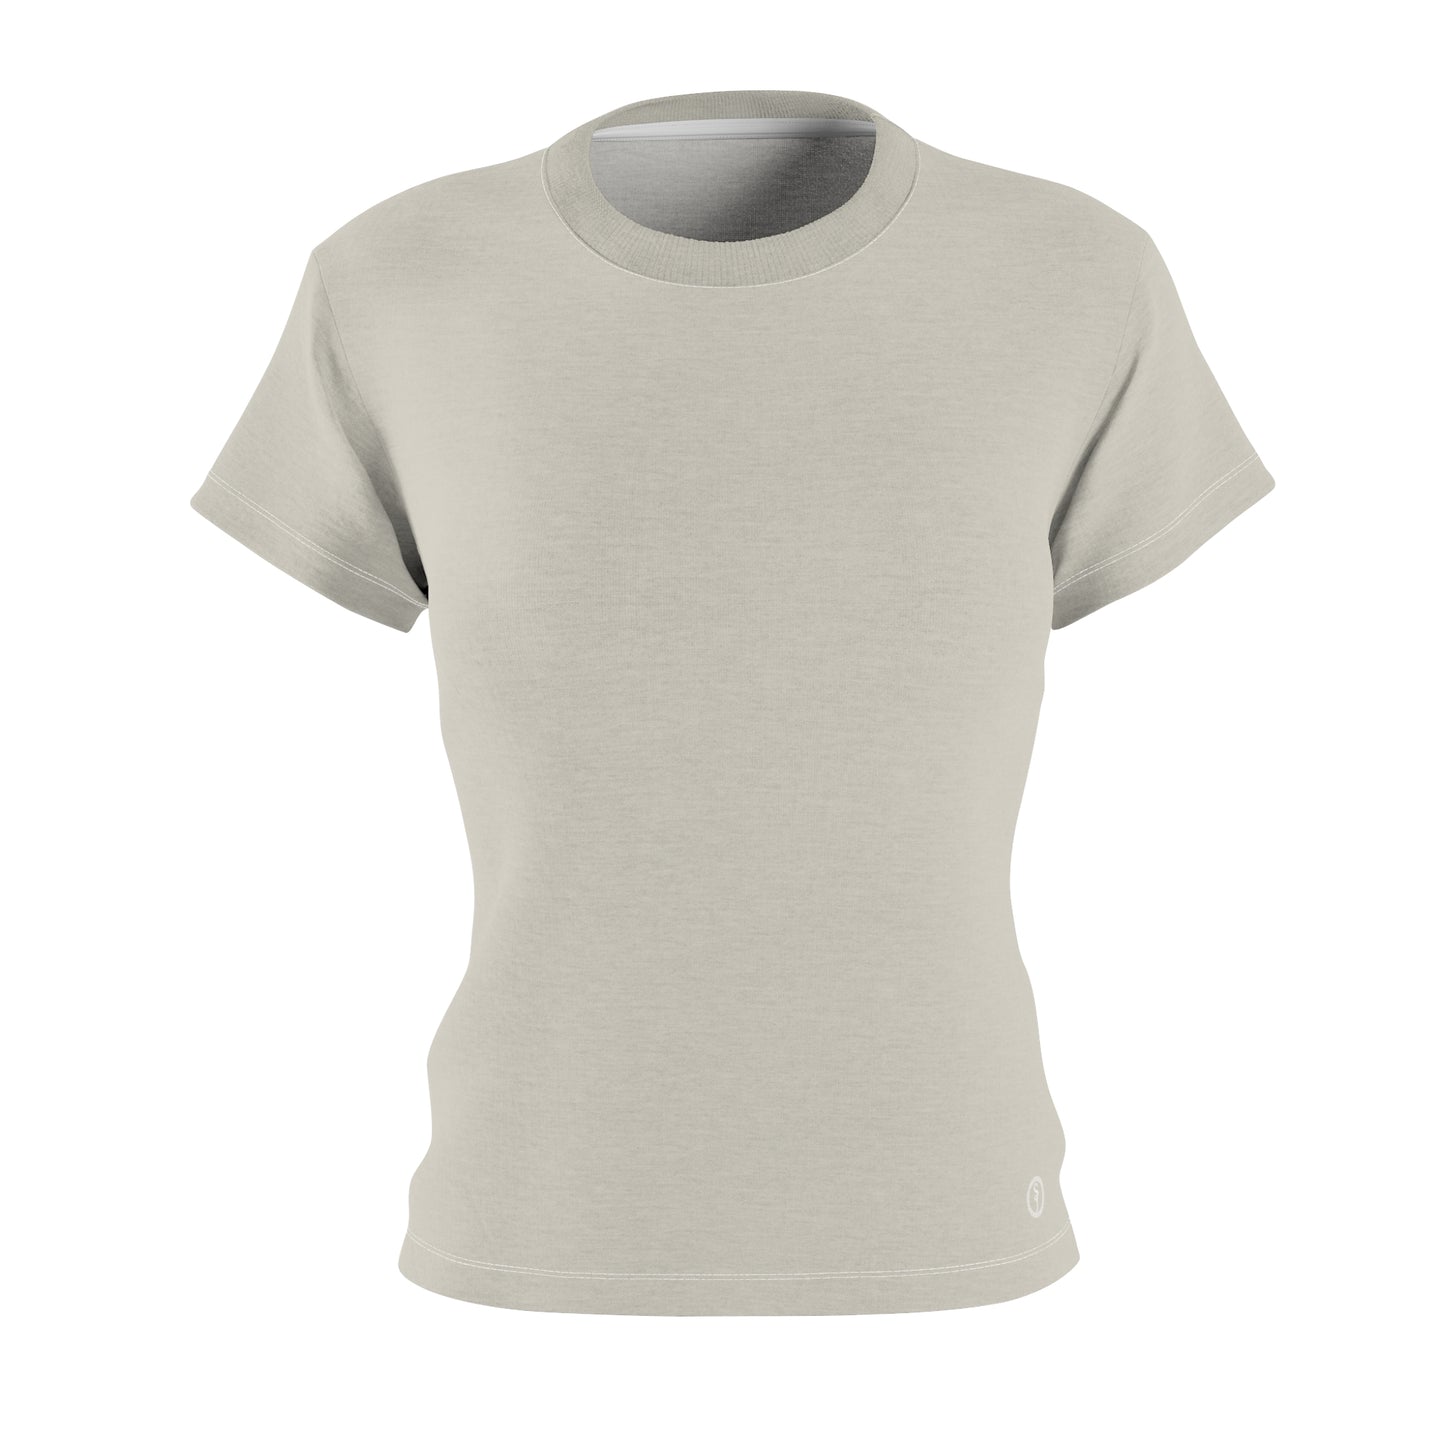 Perfect Tee In Stone Grey, Women's Classic Short Sleeve T-Shirt